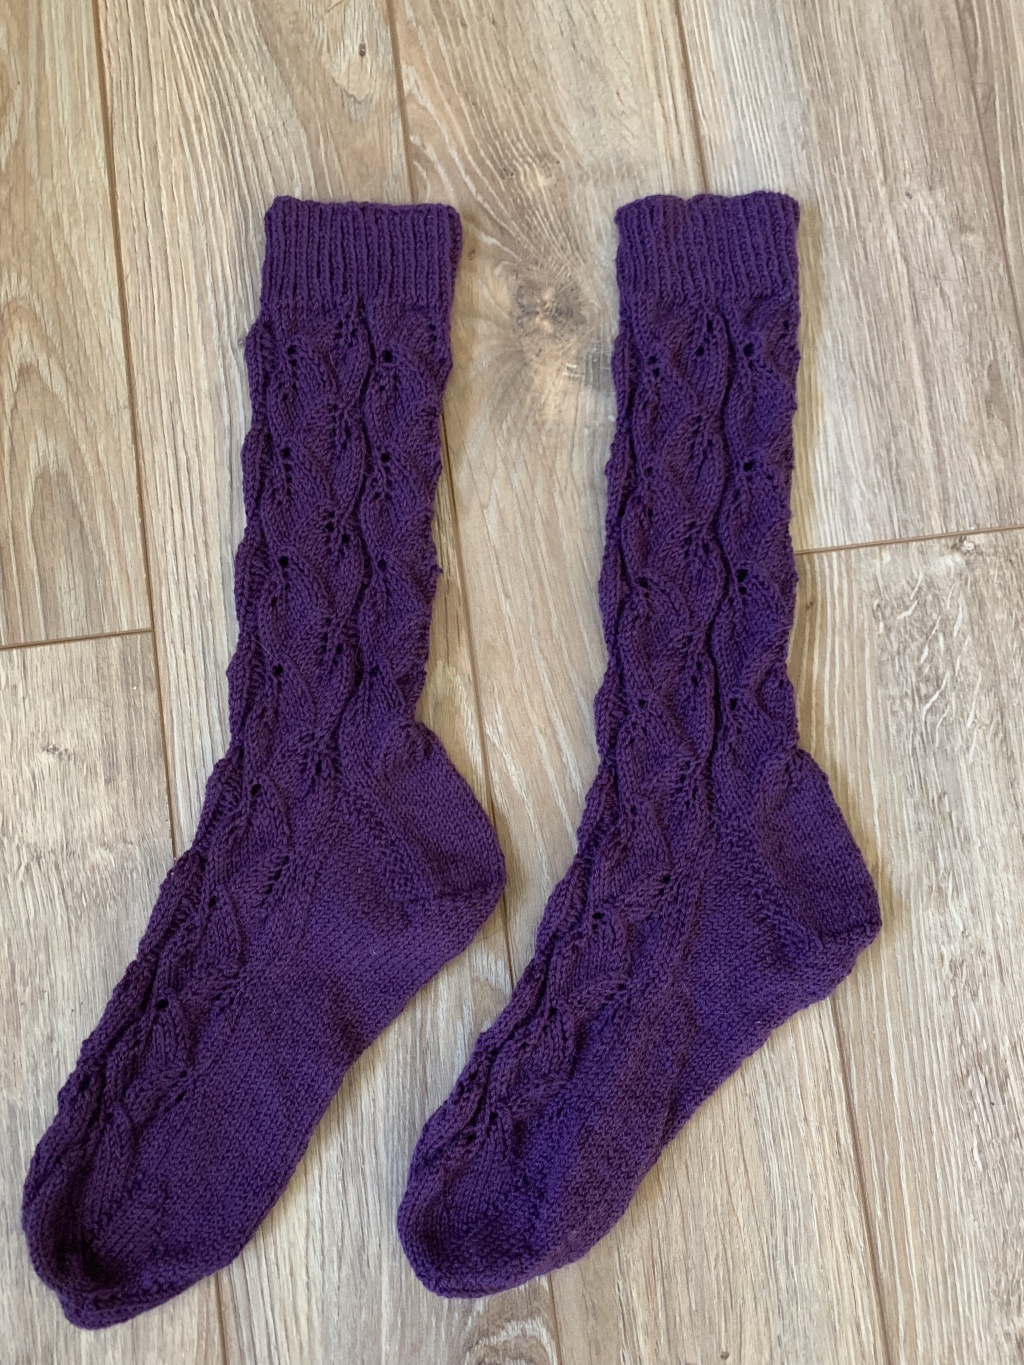 Third Times a Charm with Embossed Leaves Socks